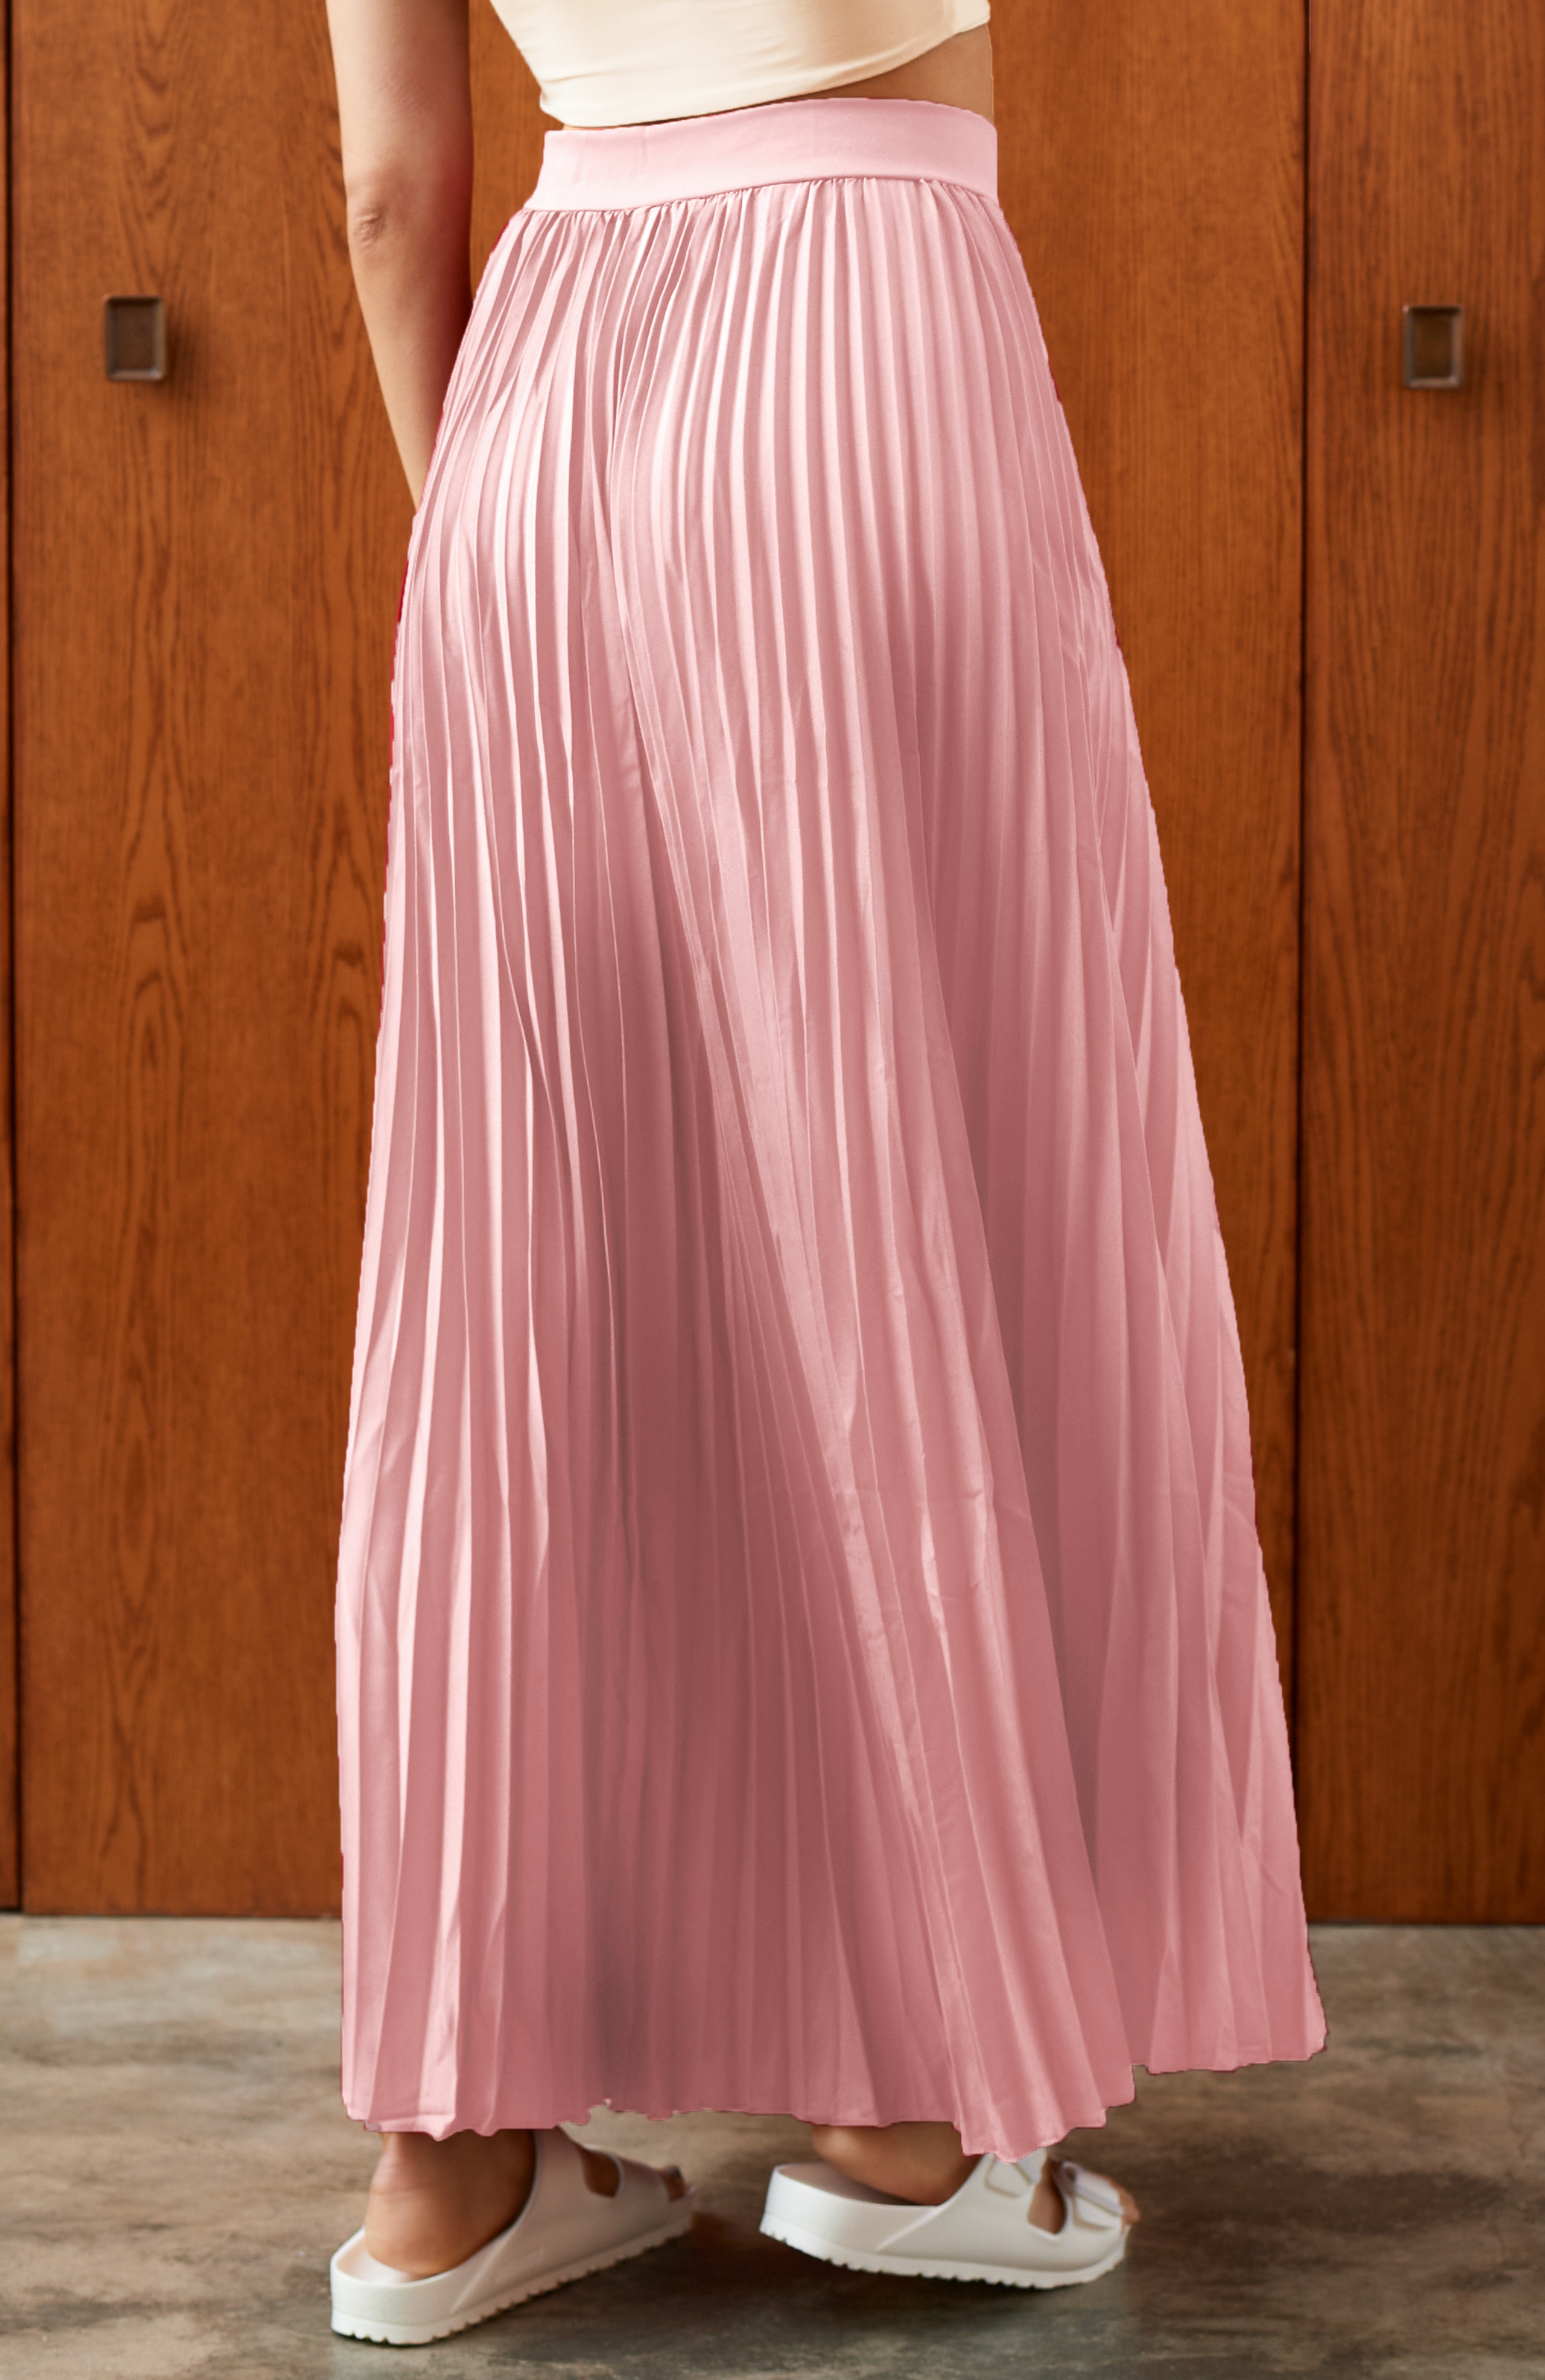 Nuzzle Clothing Pleated Maxi Skirt in Blush